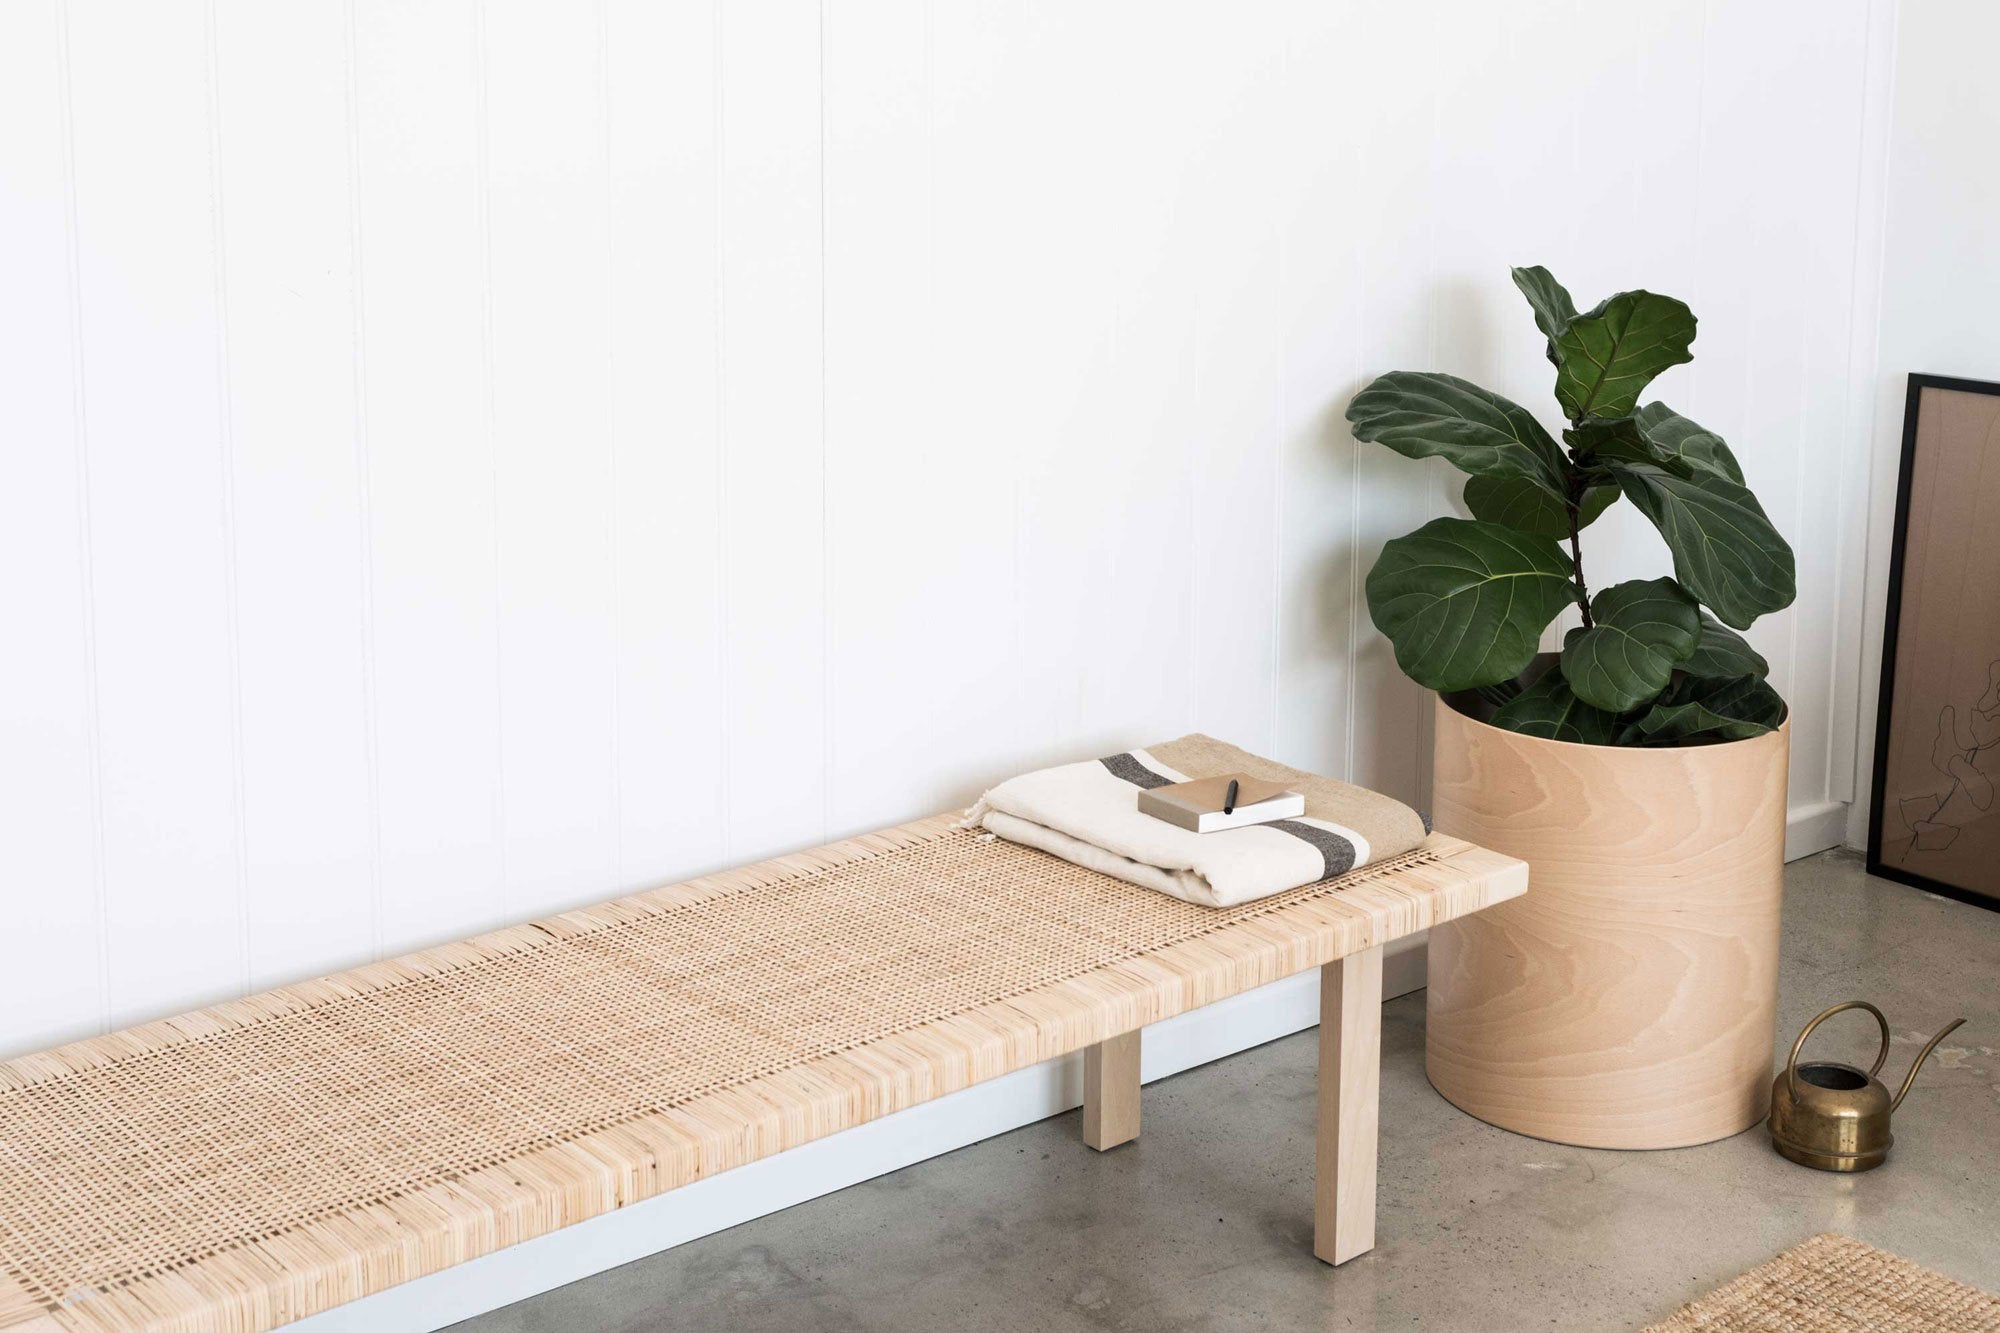 The Flor Planter by Plyroom welcomes indoor plants into your home